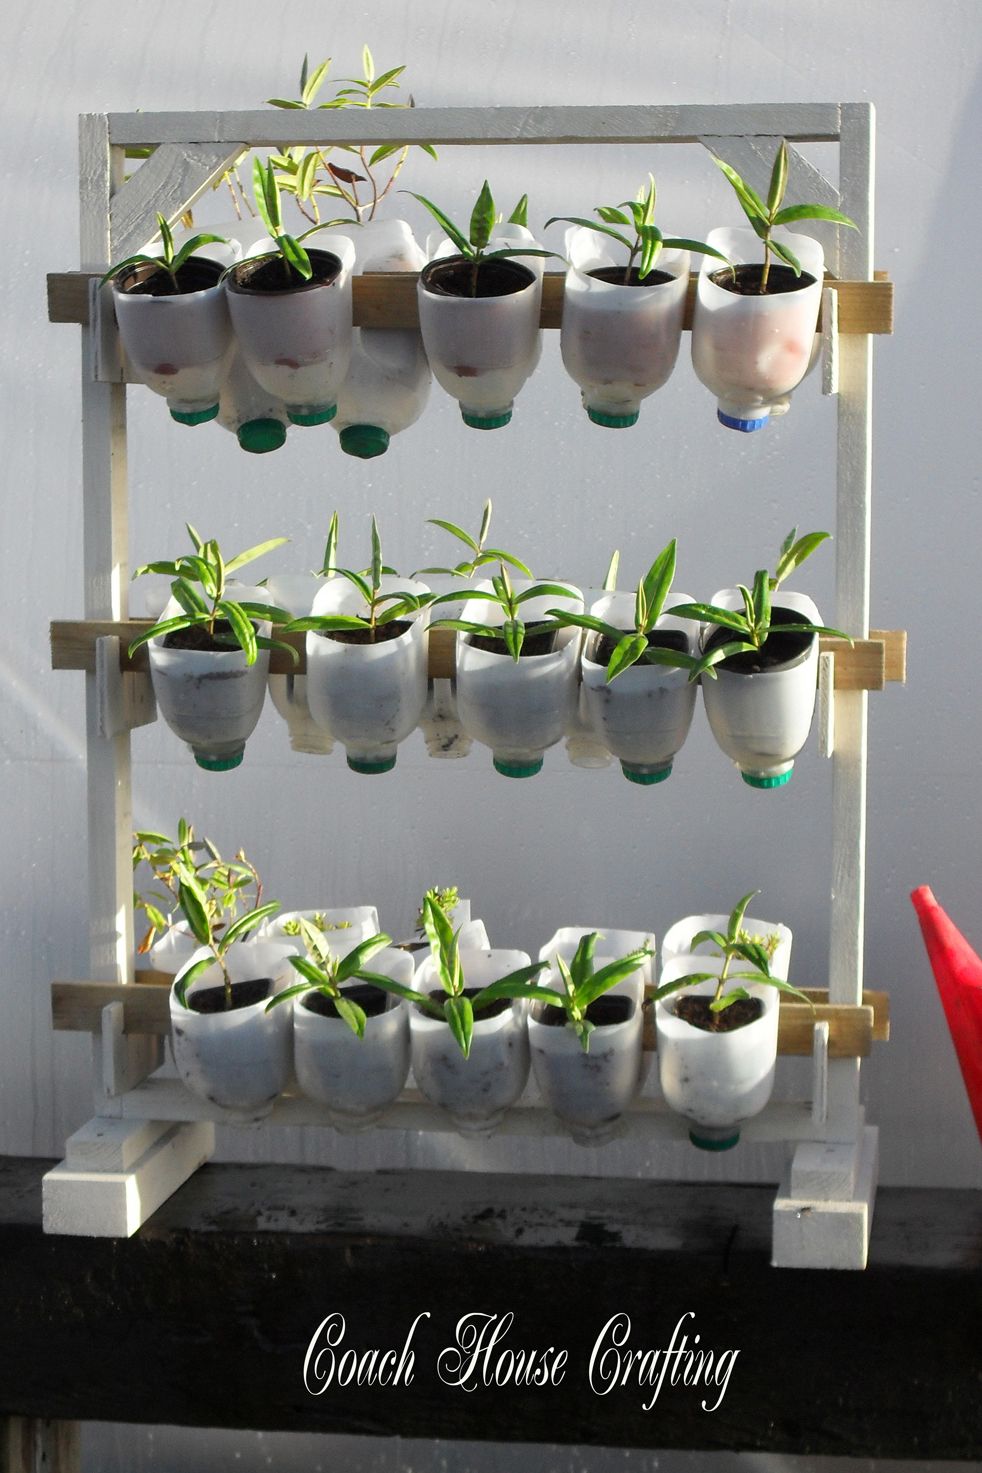 7 DIY Seed Pots From Common Household Items for Starting Seeds Indoors